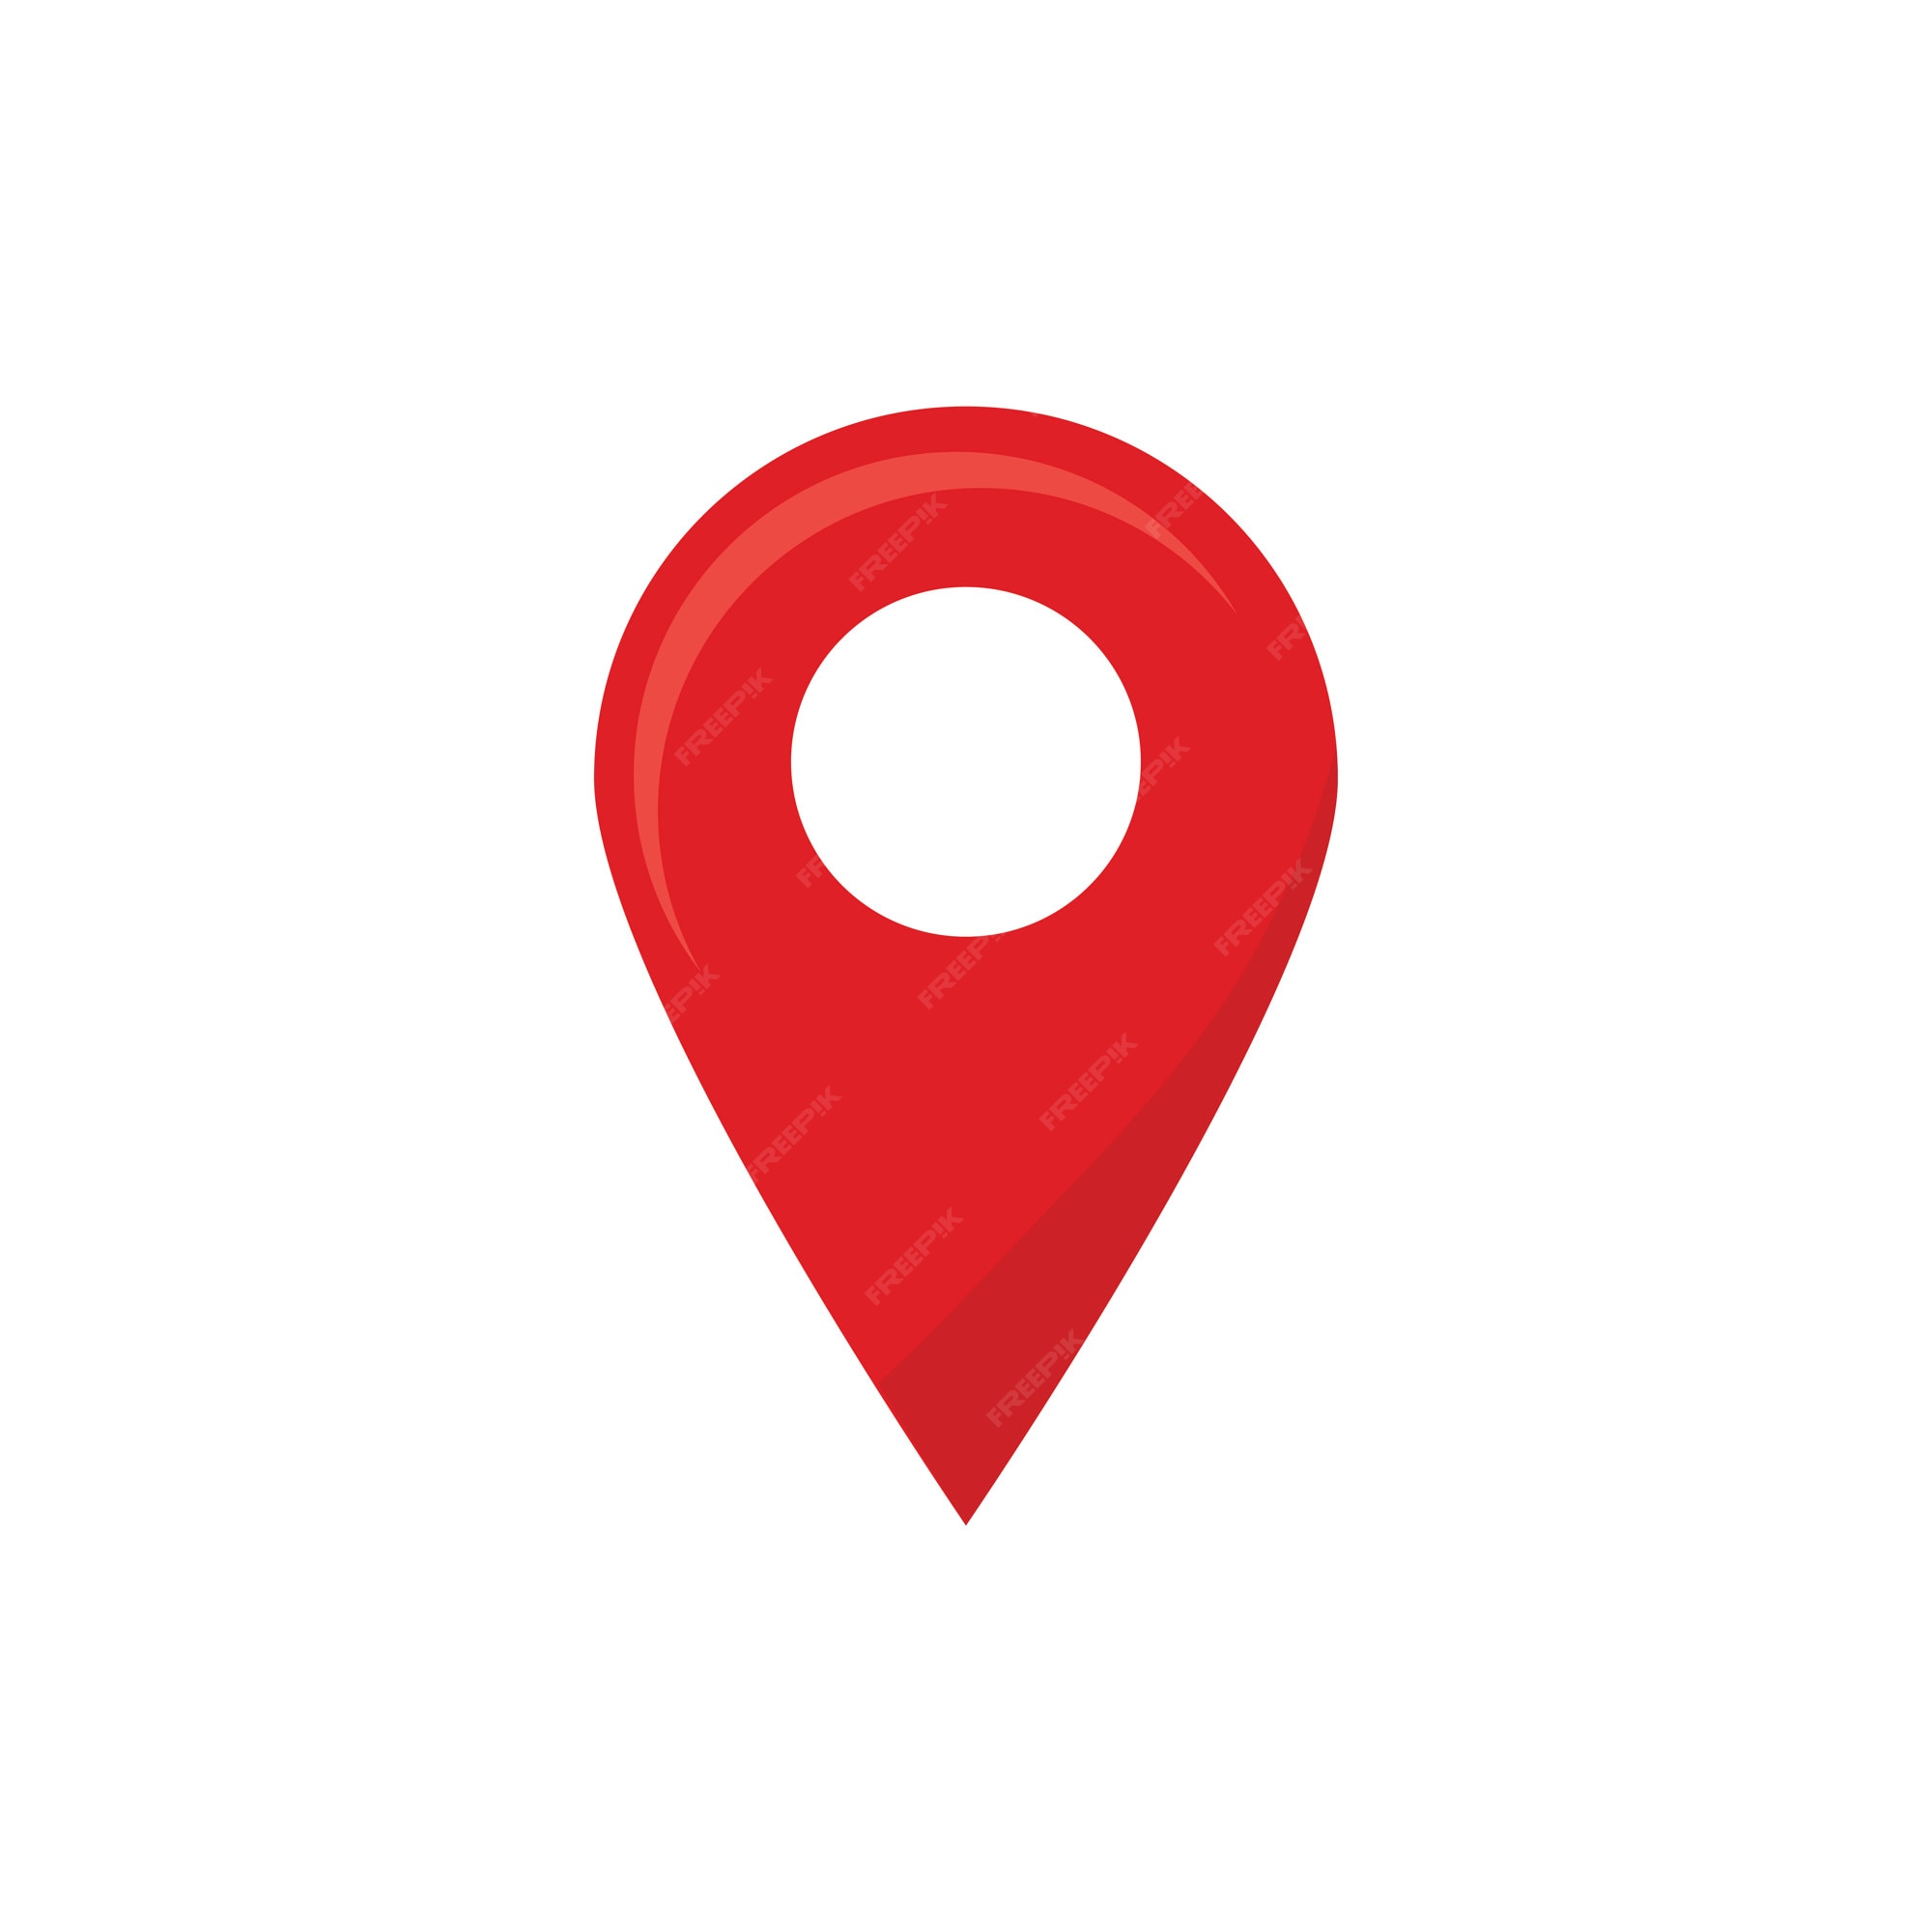 Map pin icon Images | Free Vectors, Stock Photos & PSD